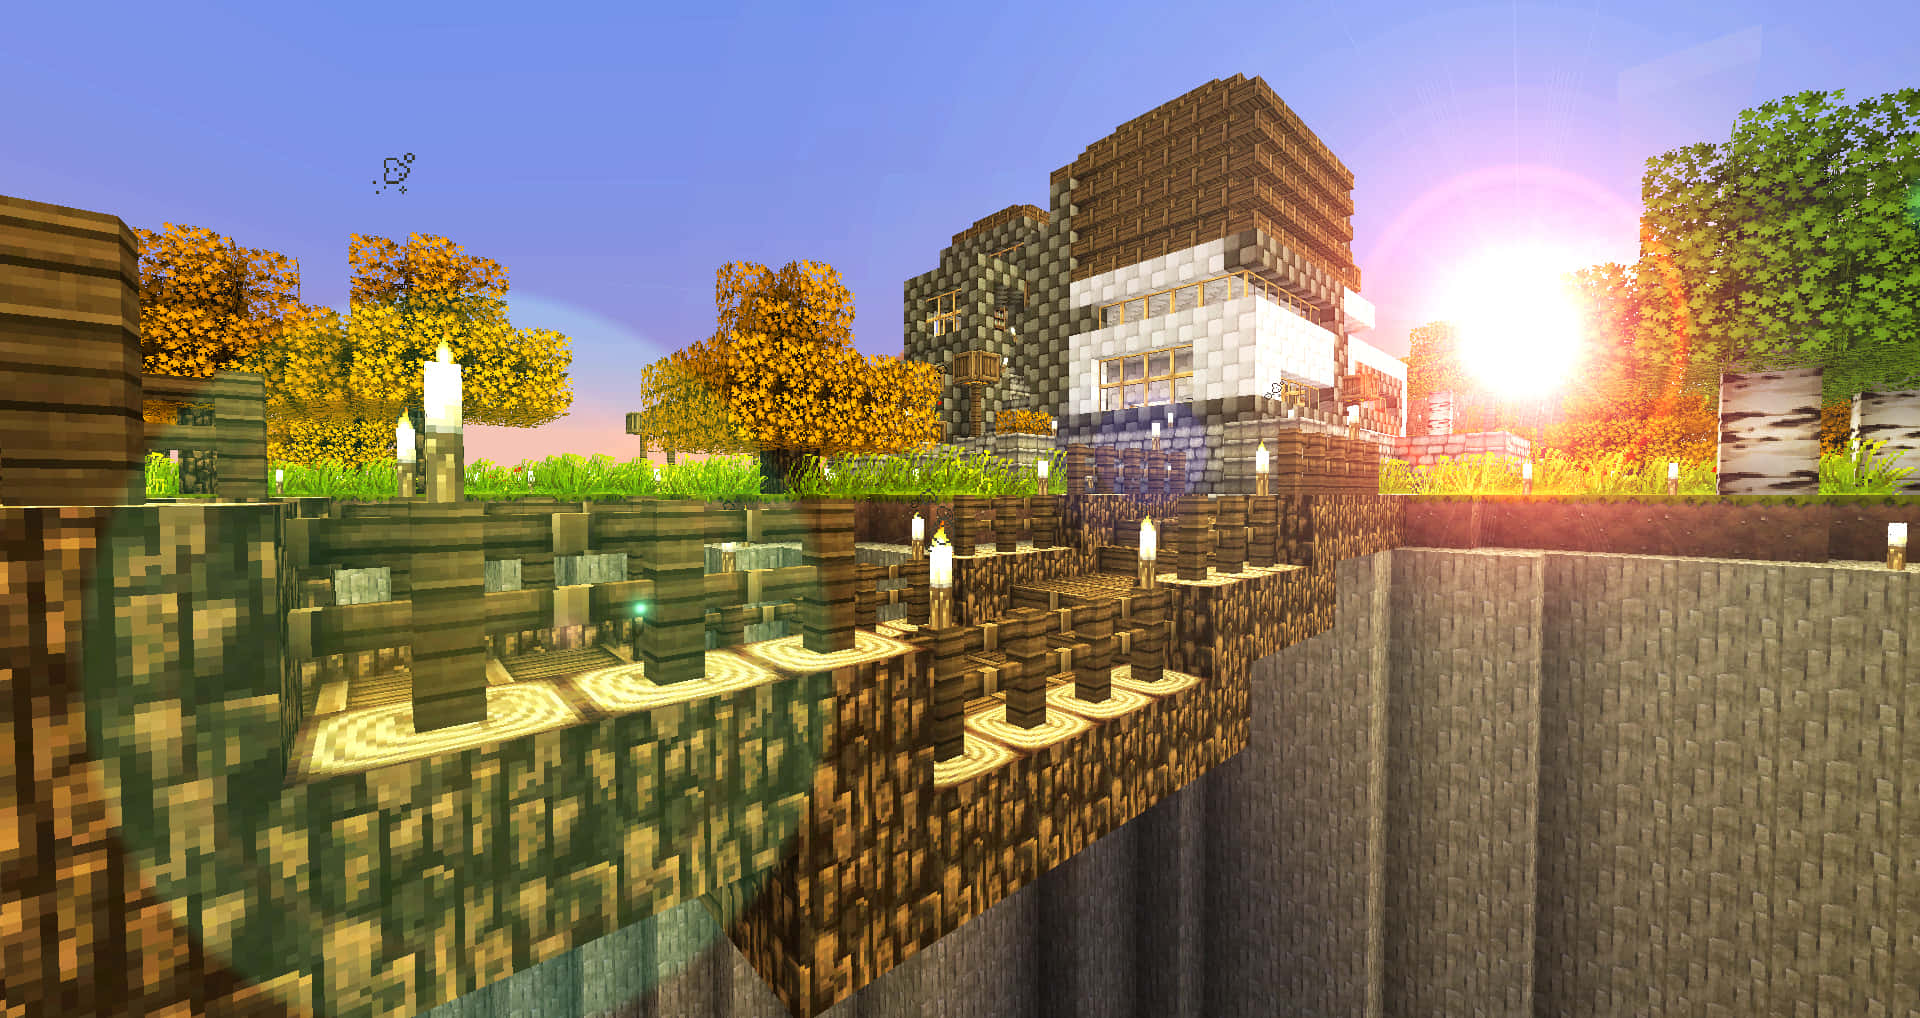 Watch the legendary sunset glow in the mysterious world of Minecraft Wallpaper